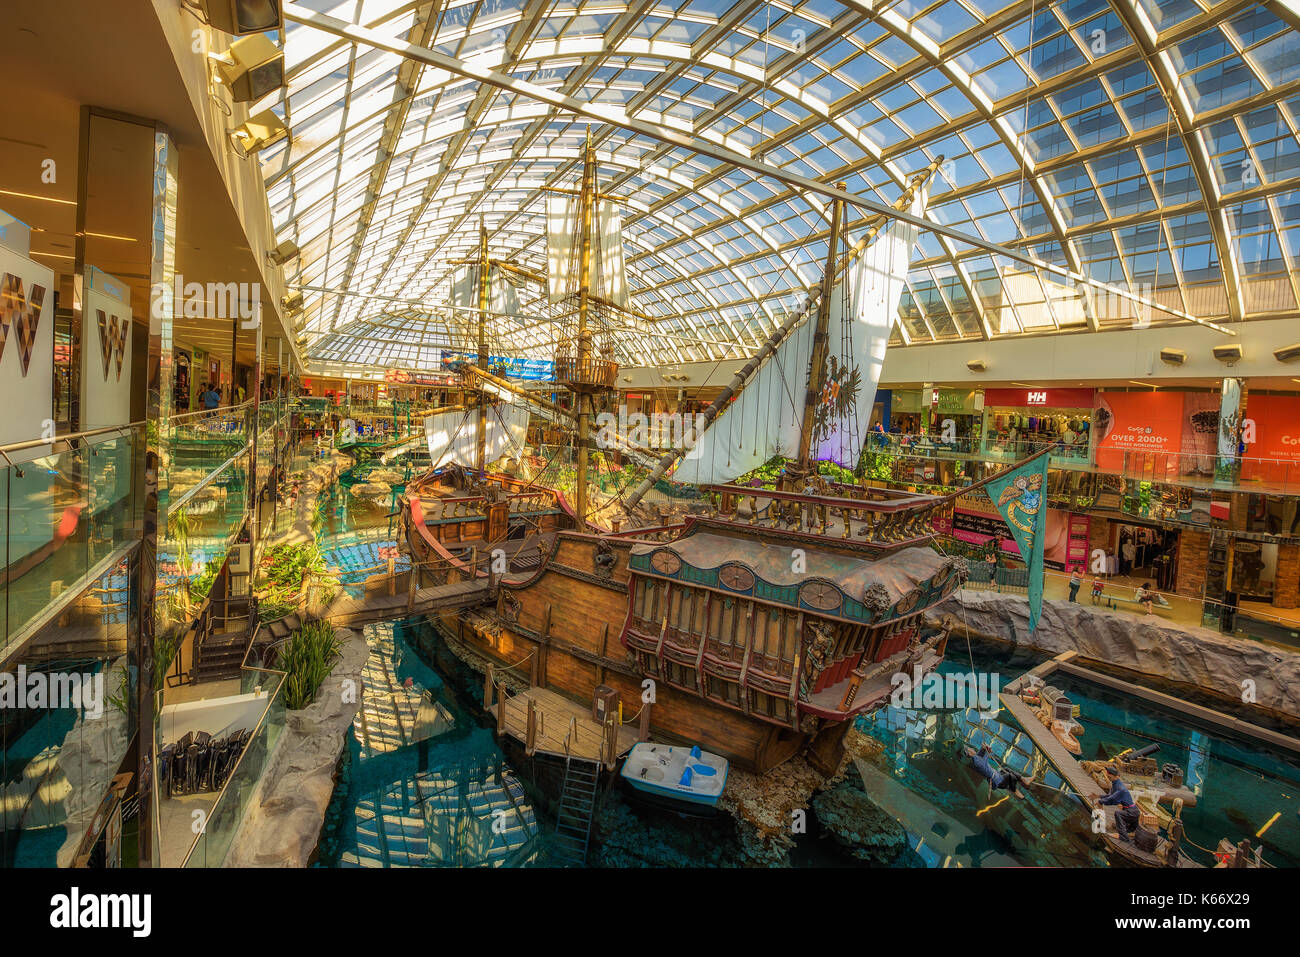 St.Maria pirate vessel in the West Edmonton Mall. Stock Photo